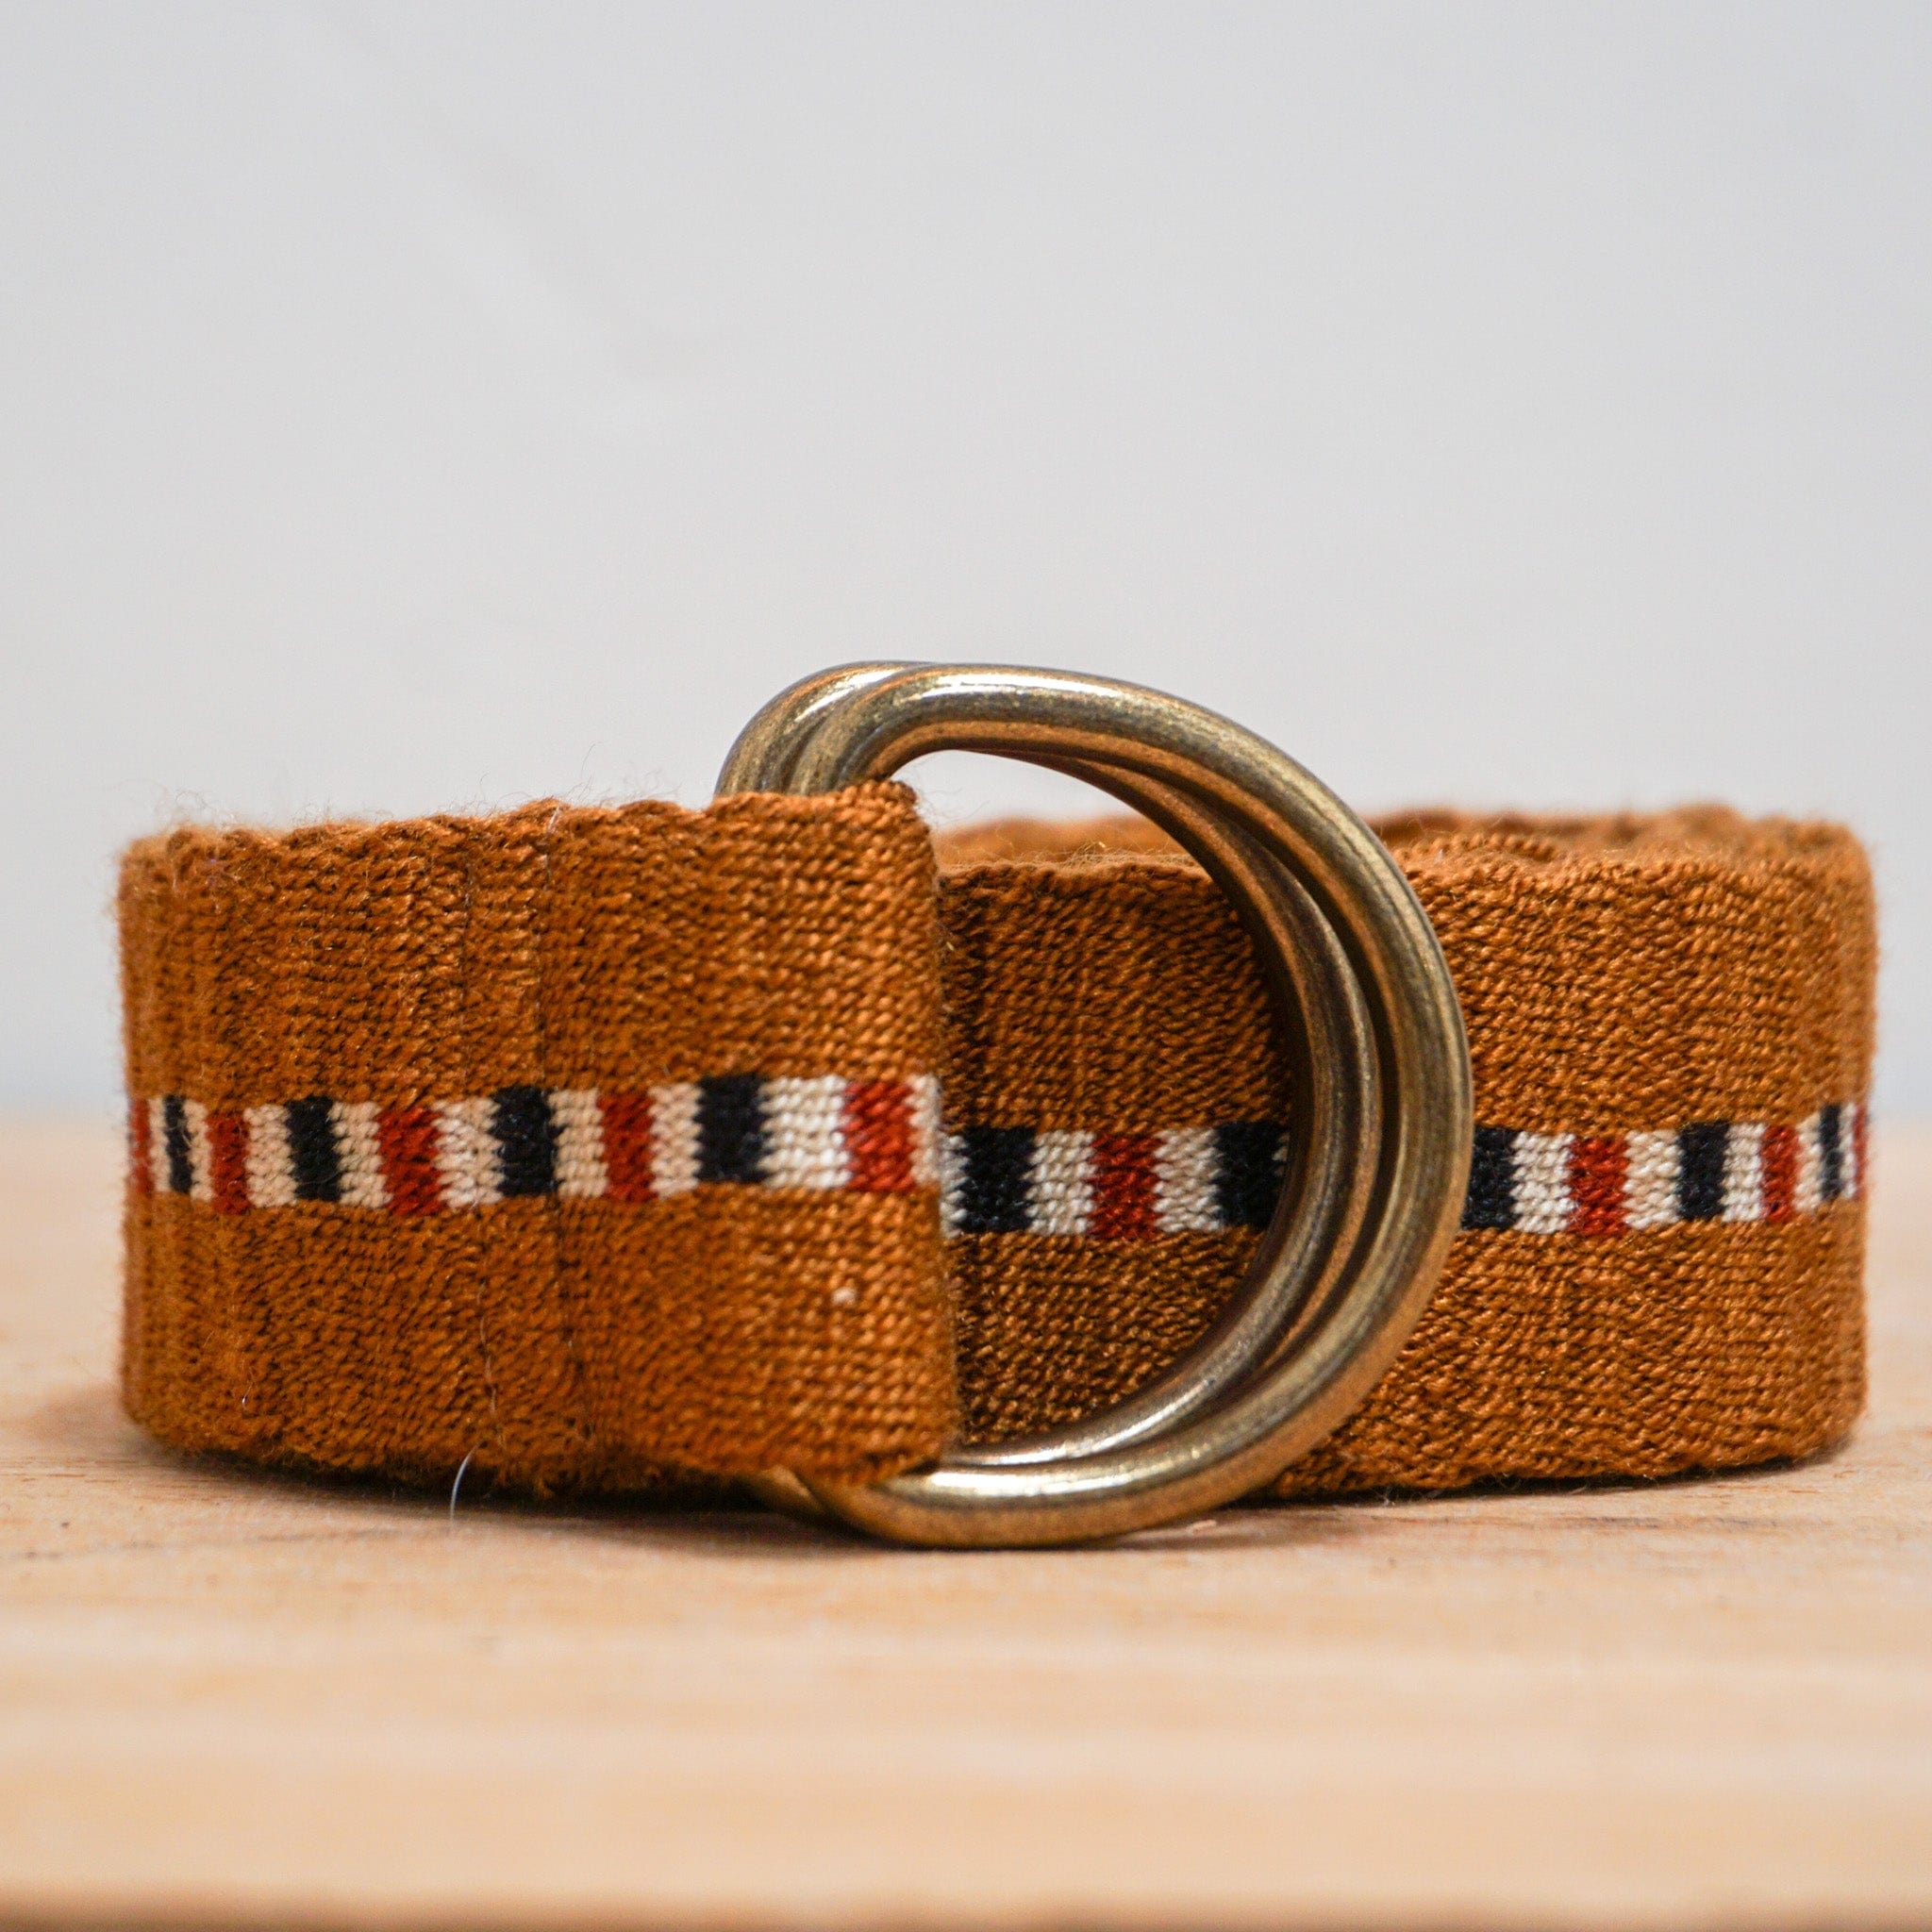 Guanabana Apparel & Accessories Braided Belt by Guanabana in Camel and Terracotta with Metal Buckle